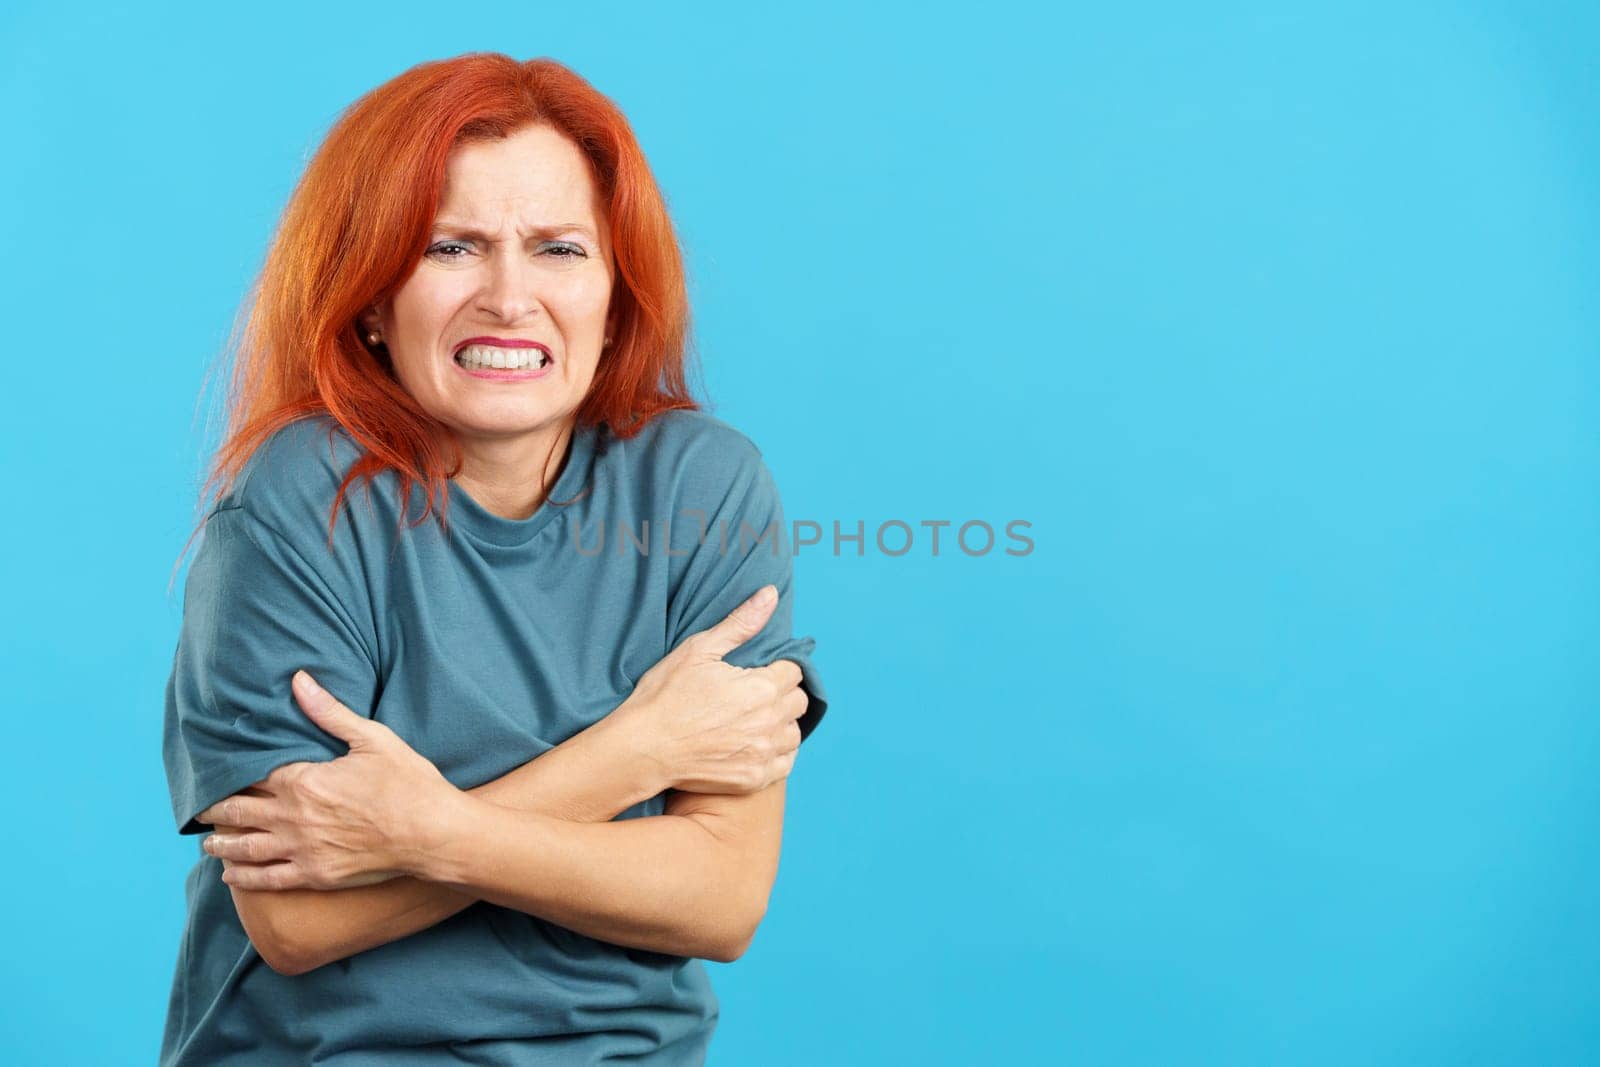 Mature redheaded woman looking at camera gesturing she is cold in studio with blue background